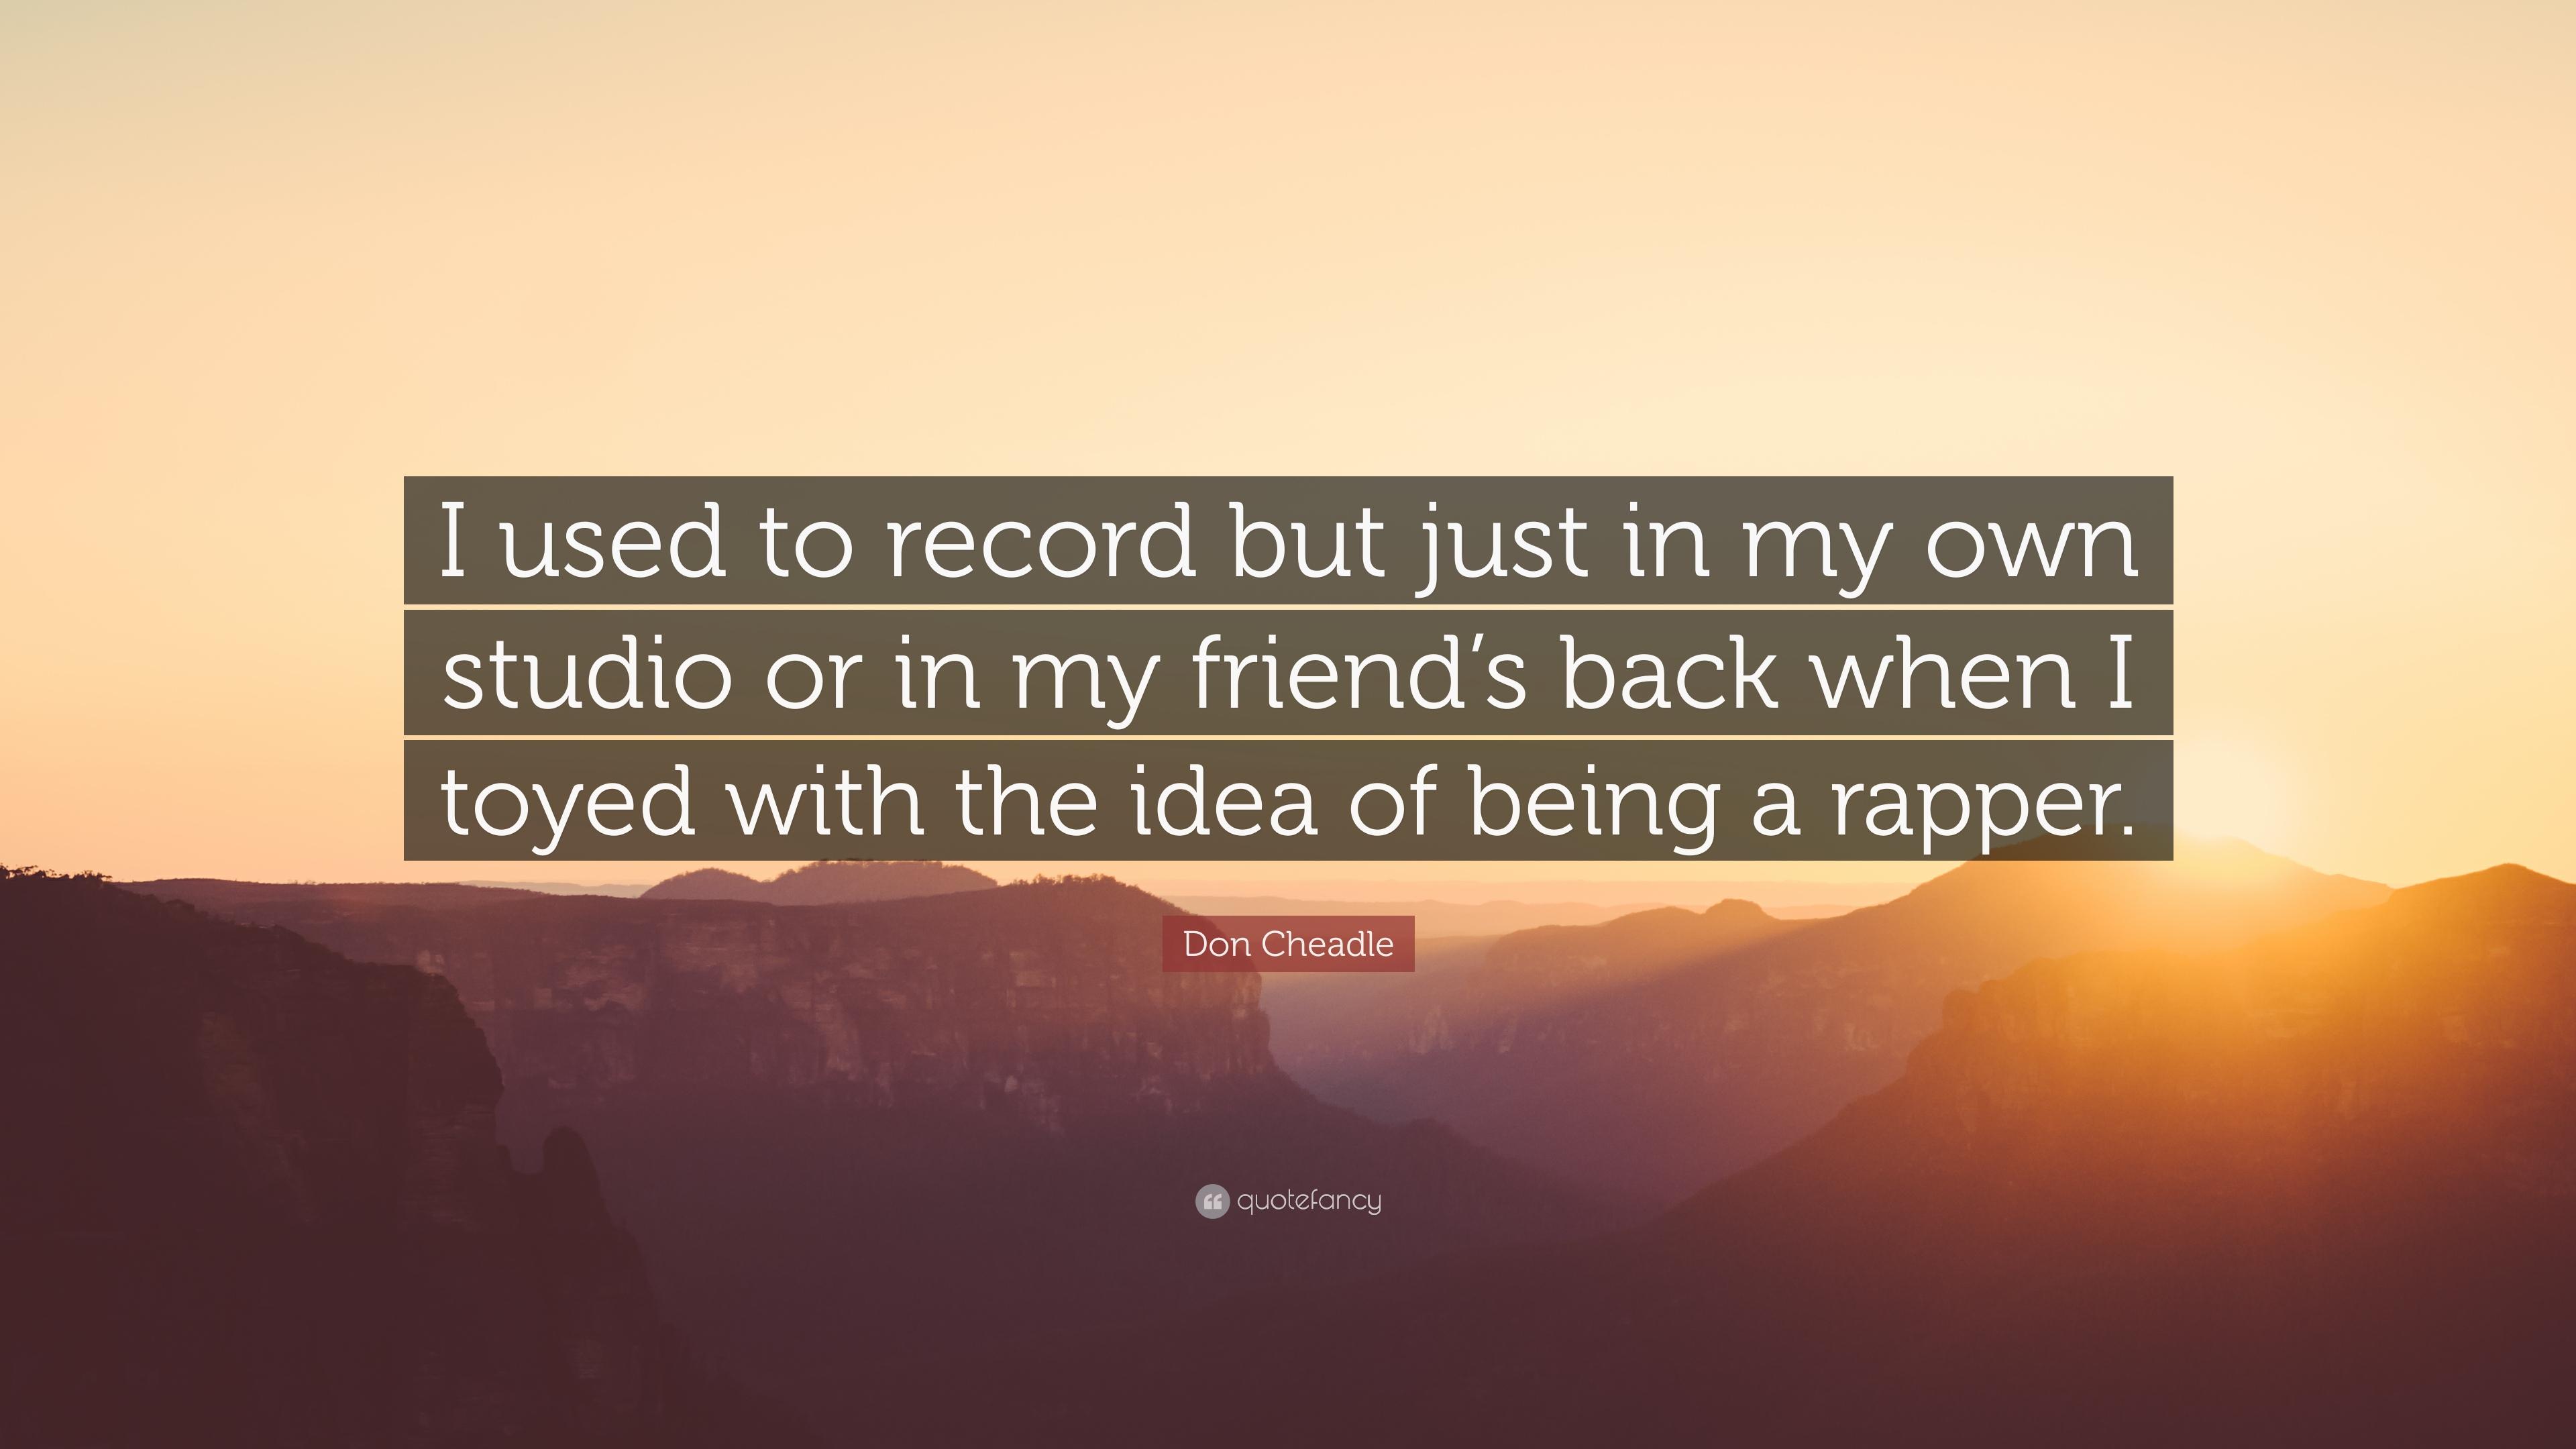 Don Cheadle Quote: “I used to record but just in my own studio or